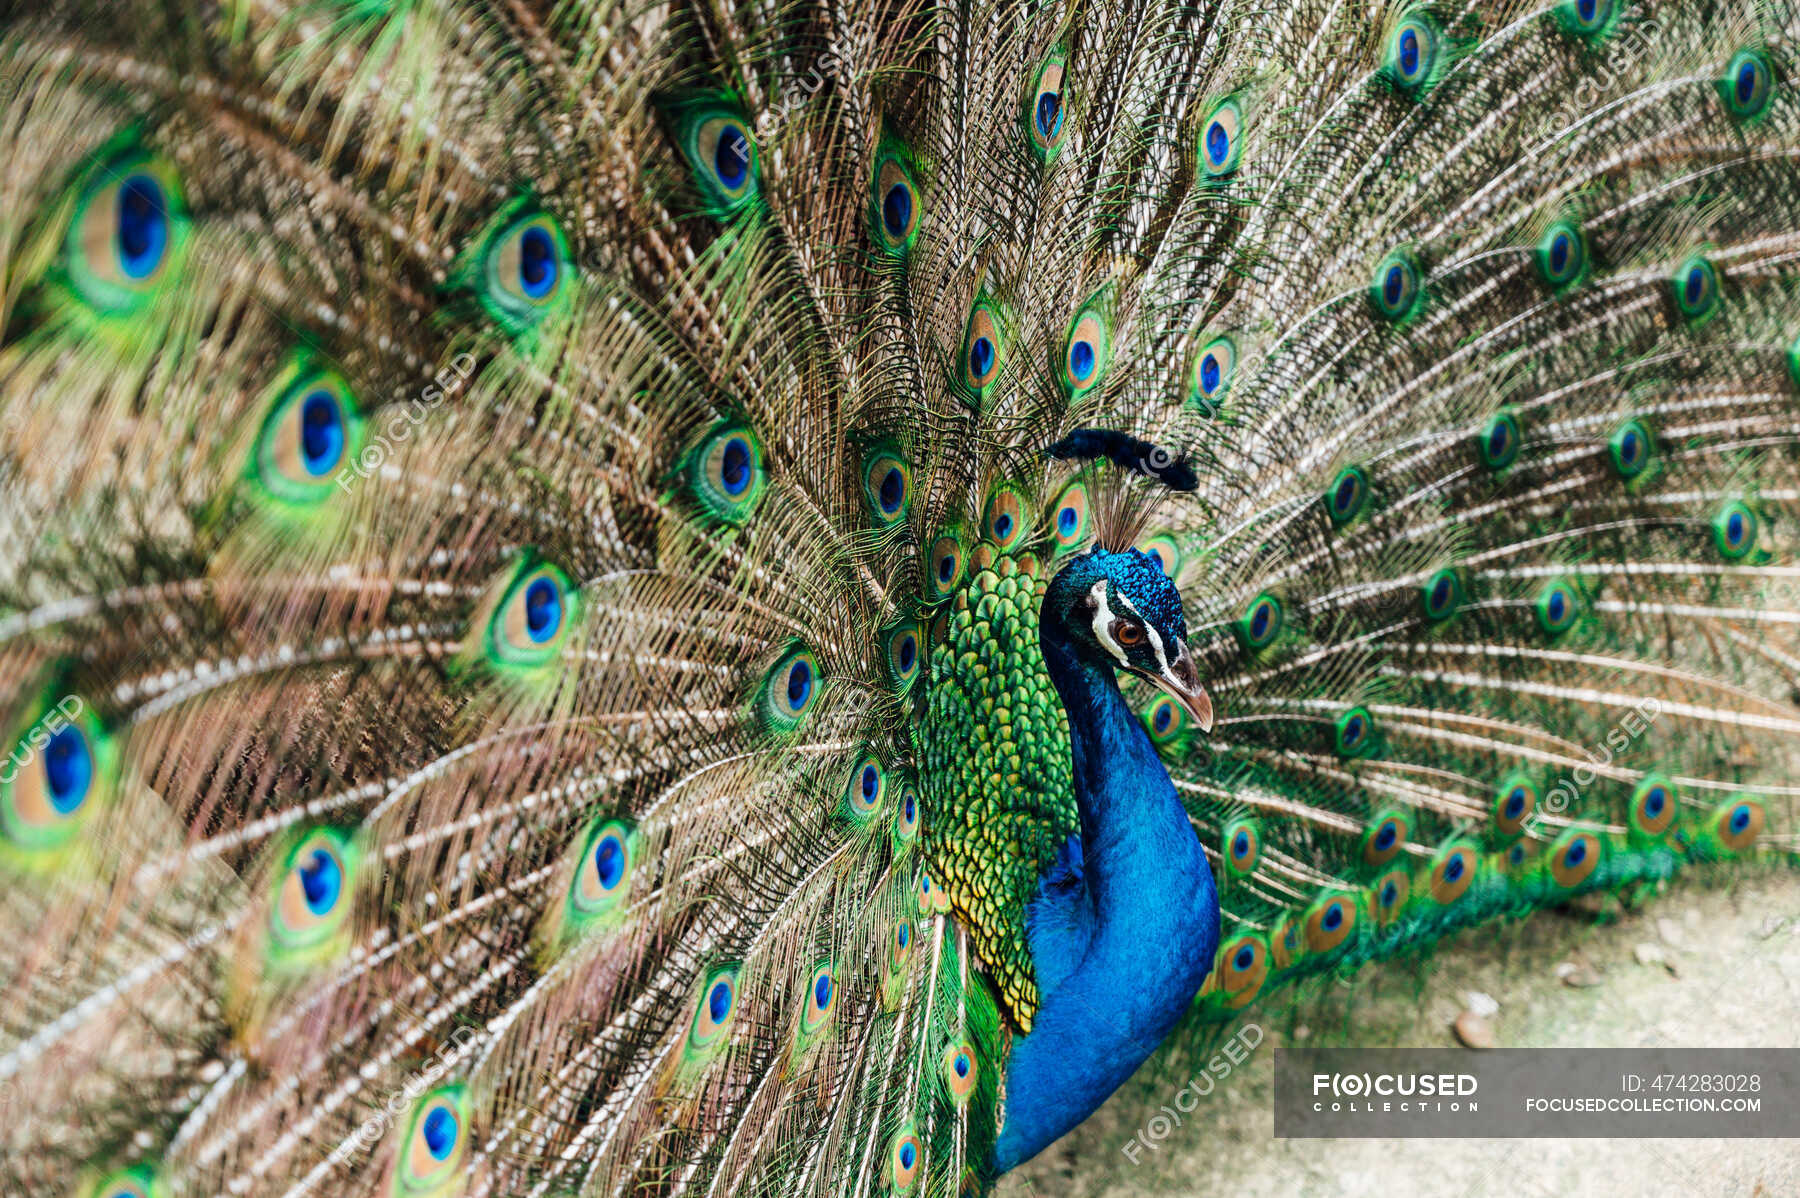 Malaysia, Portrait of peacock fanning out tail asia, Fanned - Stock | #474283028